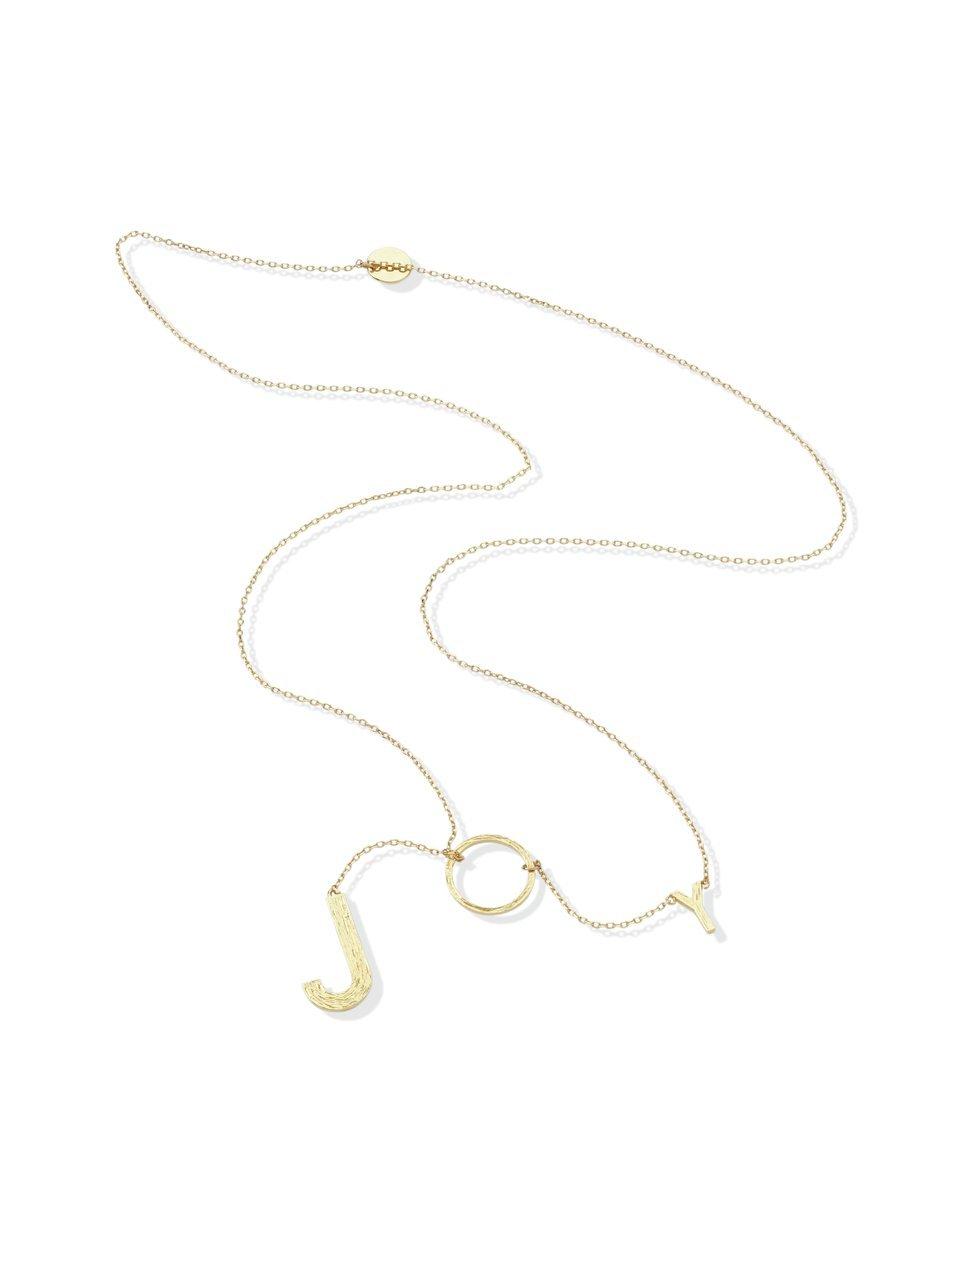 Image of Necklace anchor chains Lua Accessoires gold